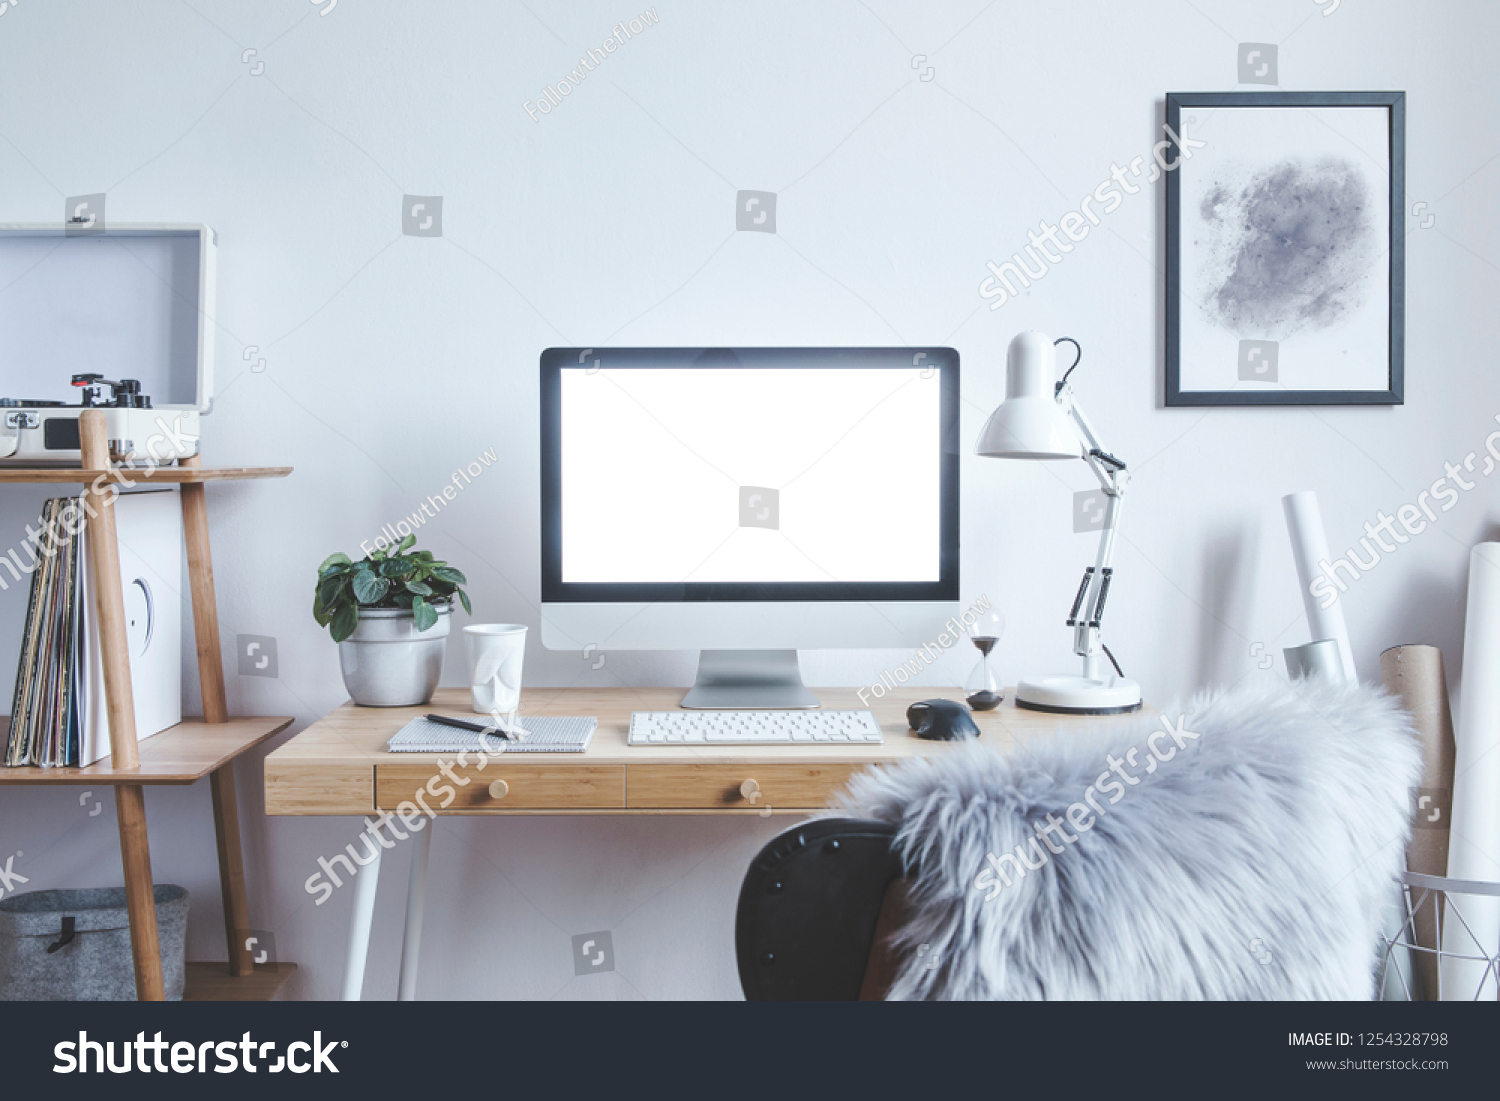 Stock Photo Stylish Scandinavian Interior Of Home Creative Desk With Mock Up Computer Screen Poster Frame 1254328798 